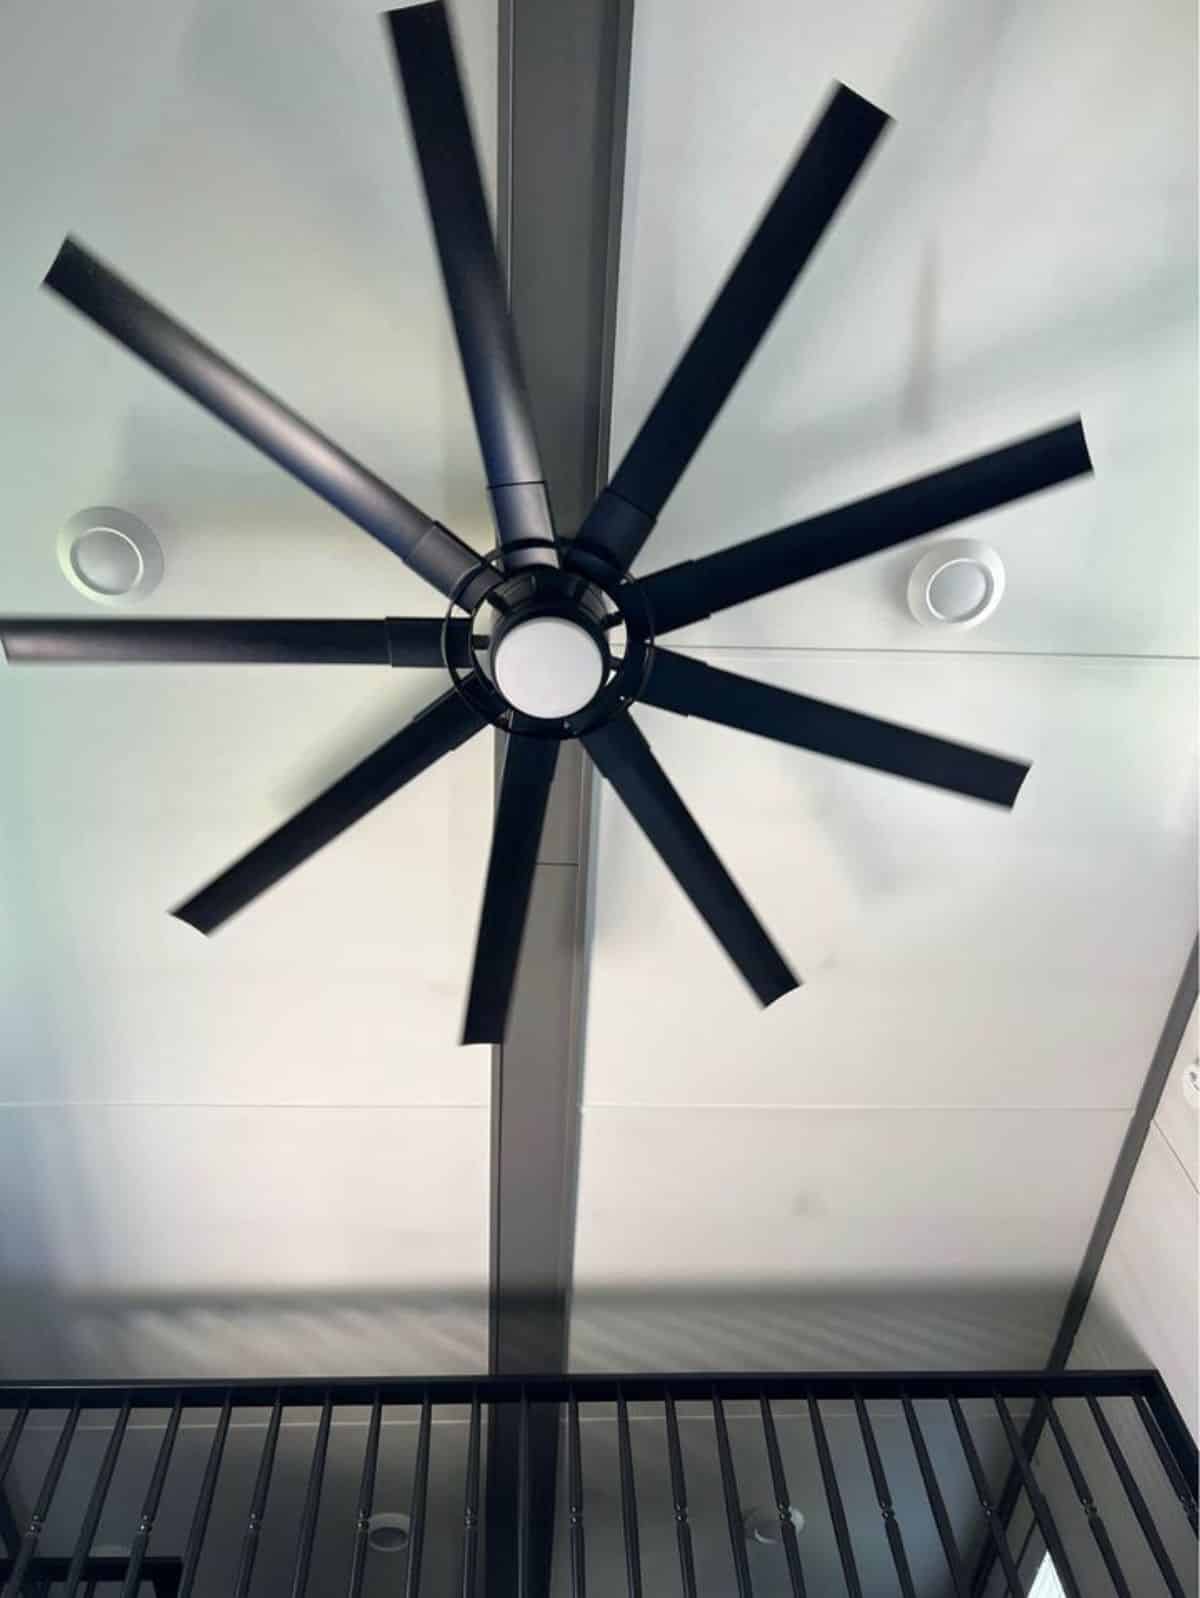 Huge fan in living area is also included into the deal